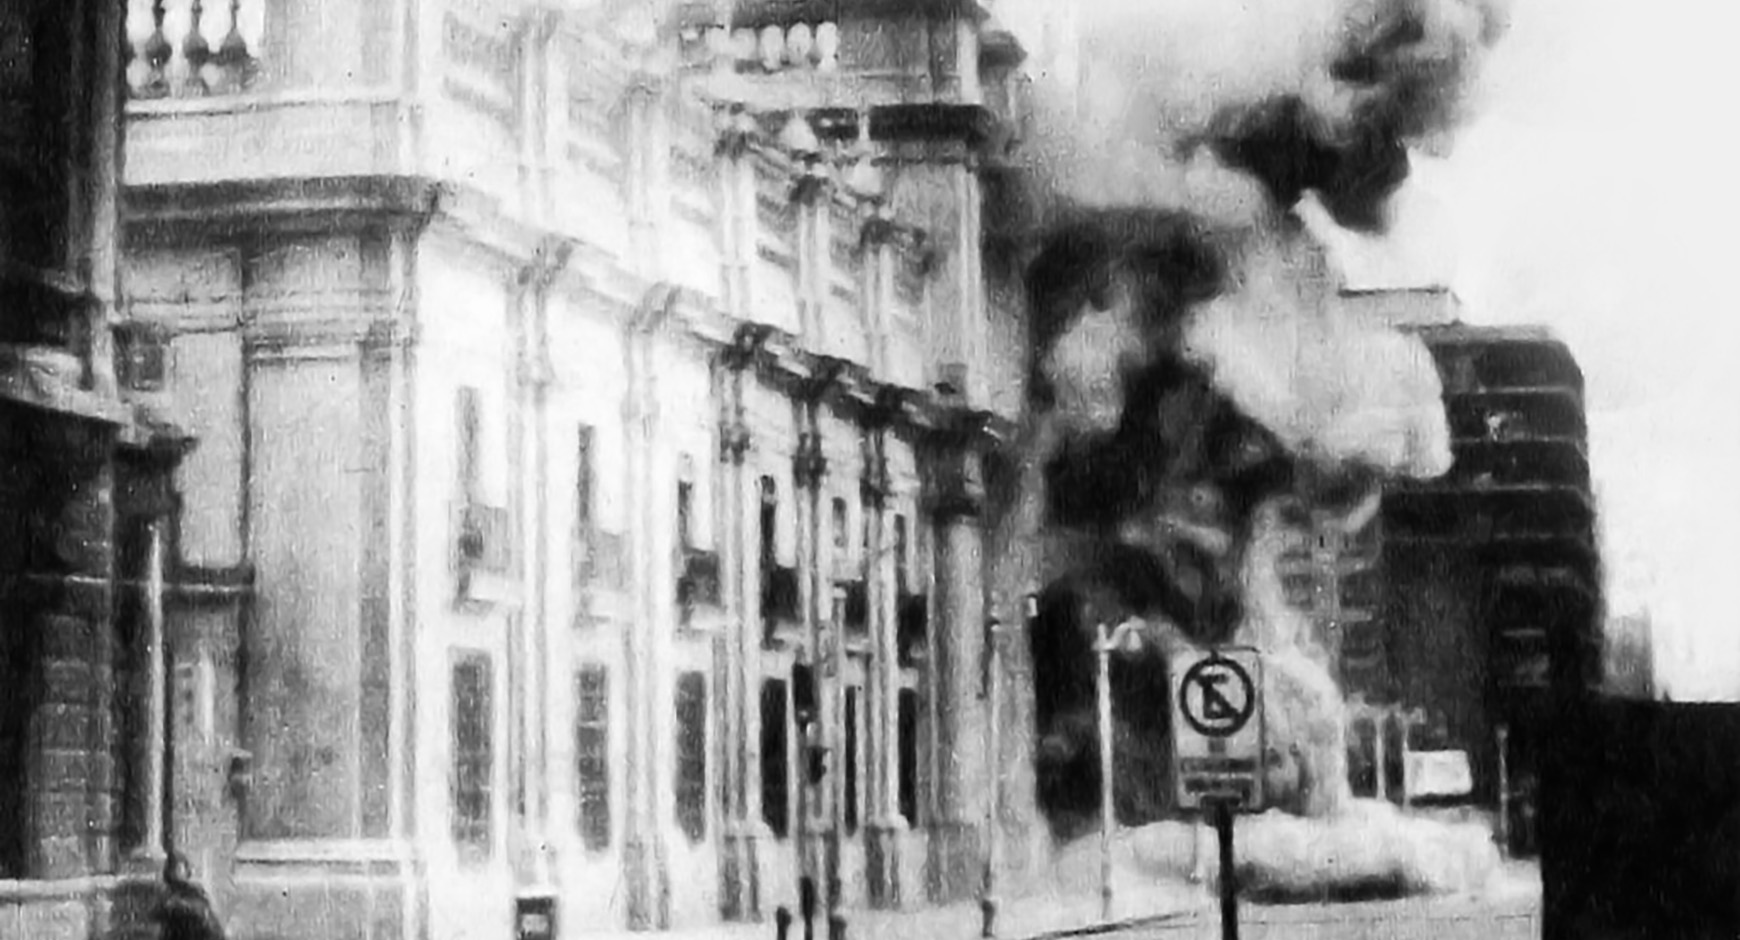 Coup of September 11, 1973. Bombing of La Moneda (presidential palace). Black and white photo of a building exploding into the street.